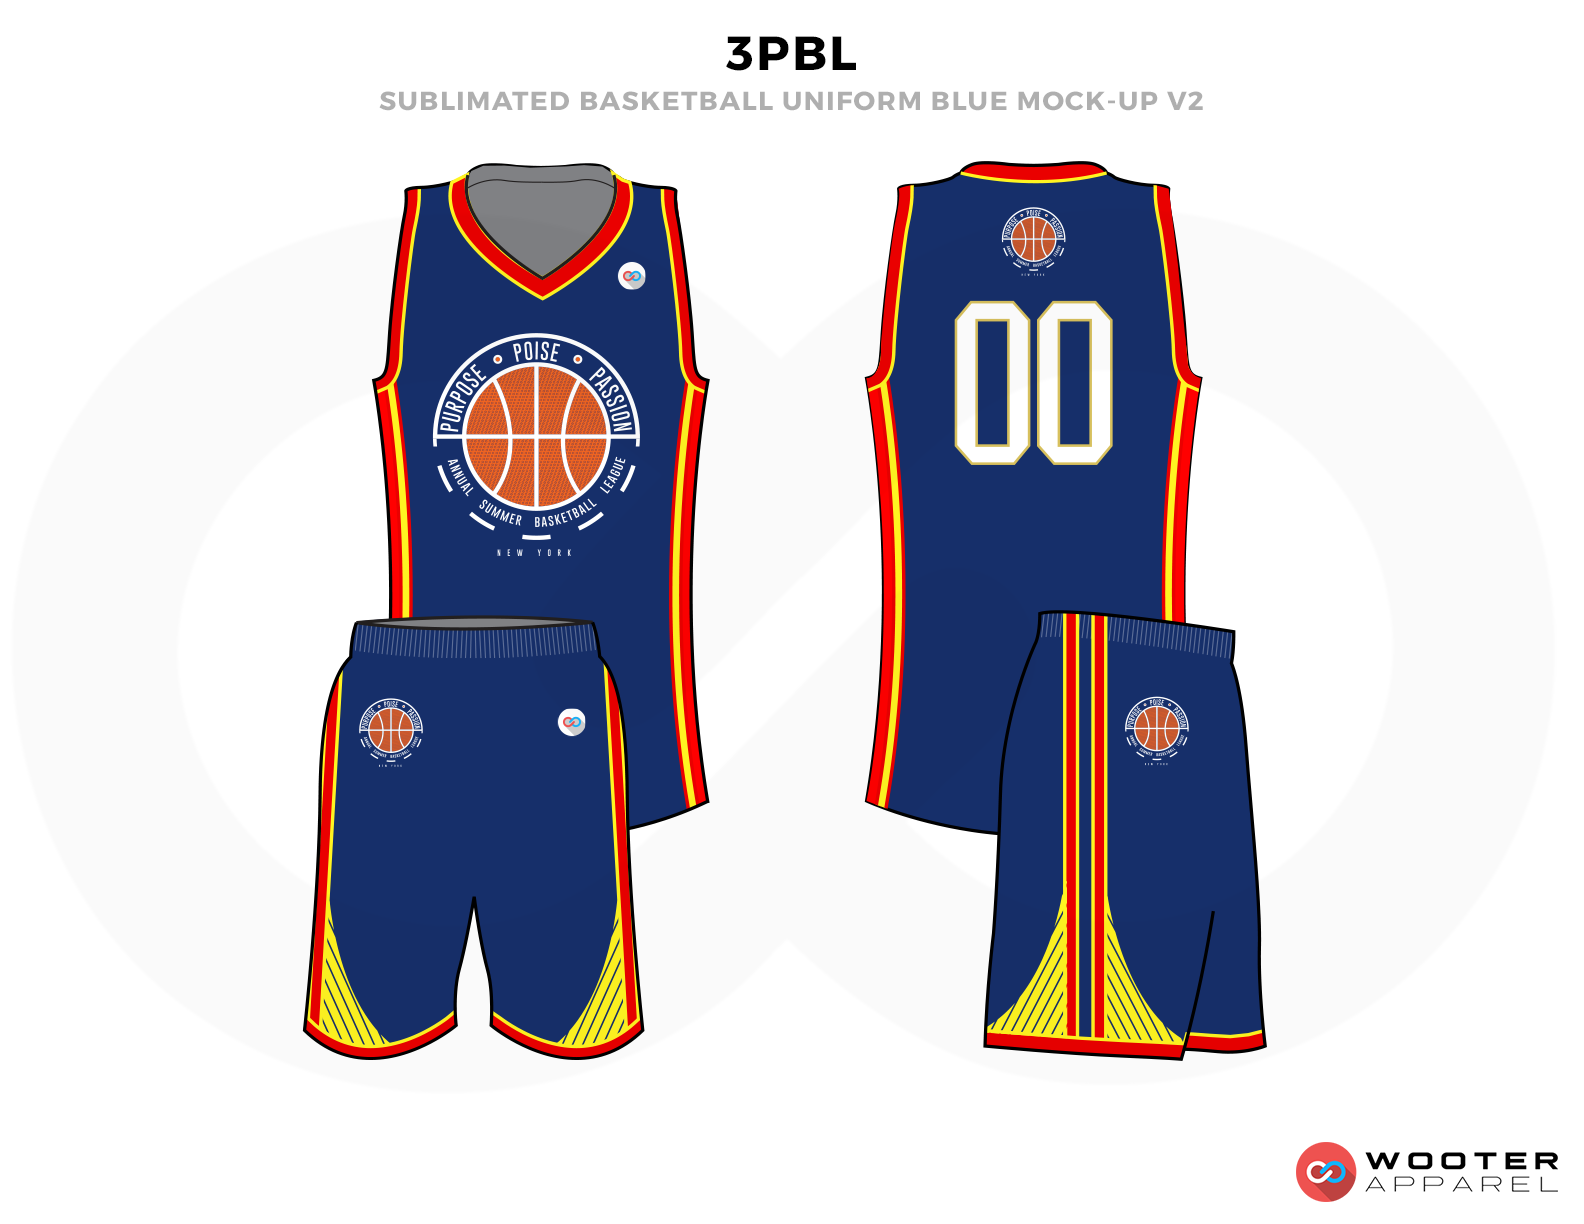 red and yellow nba jersey